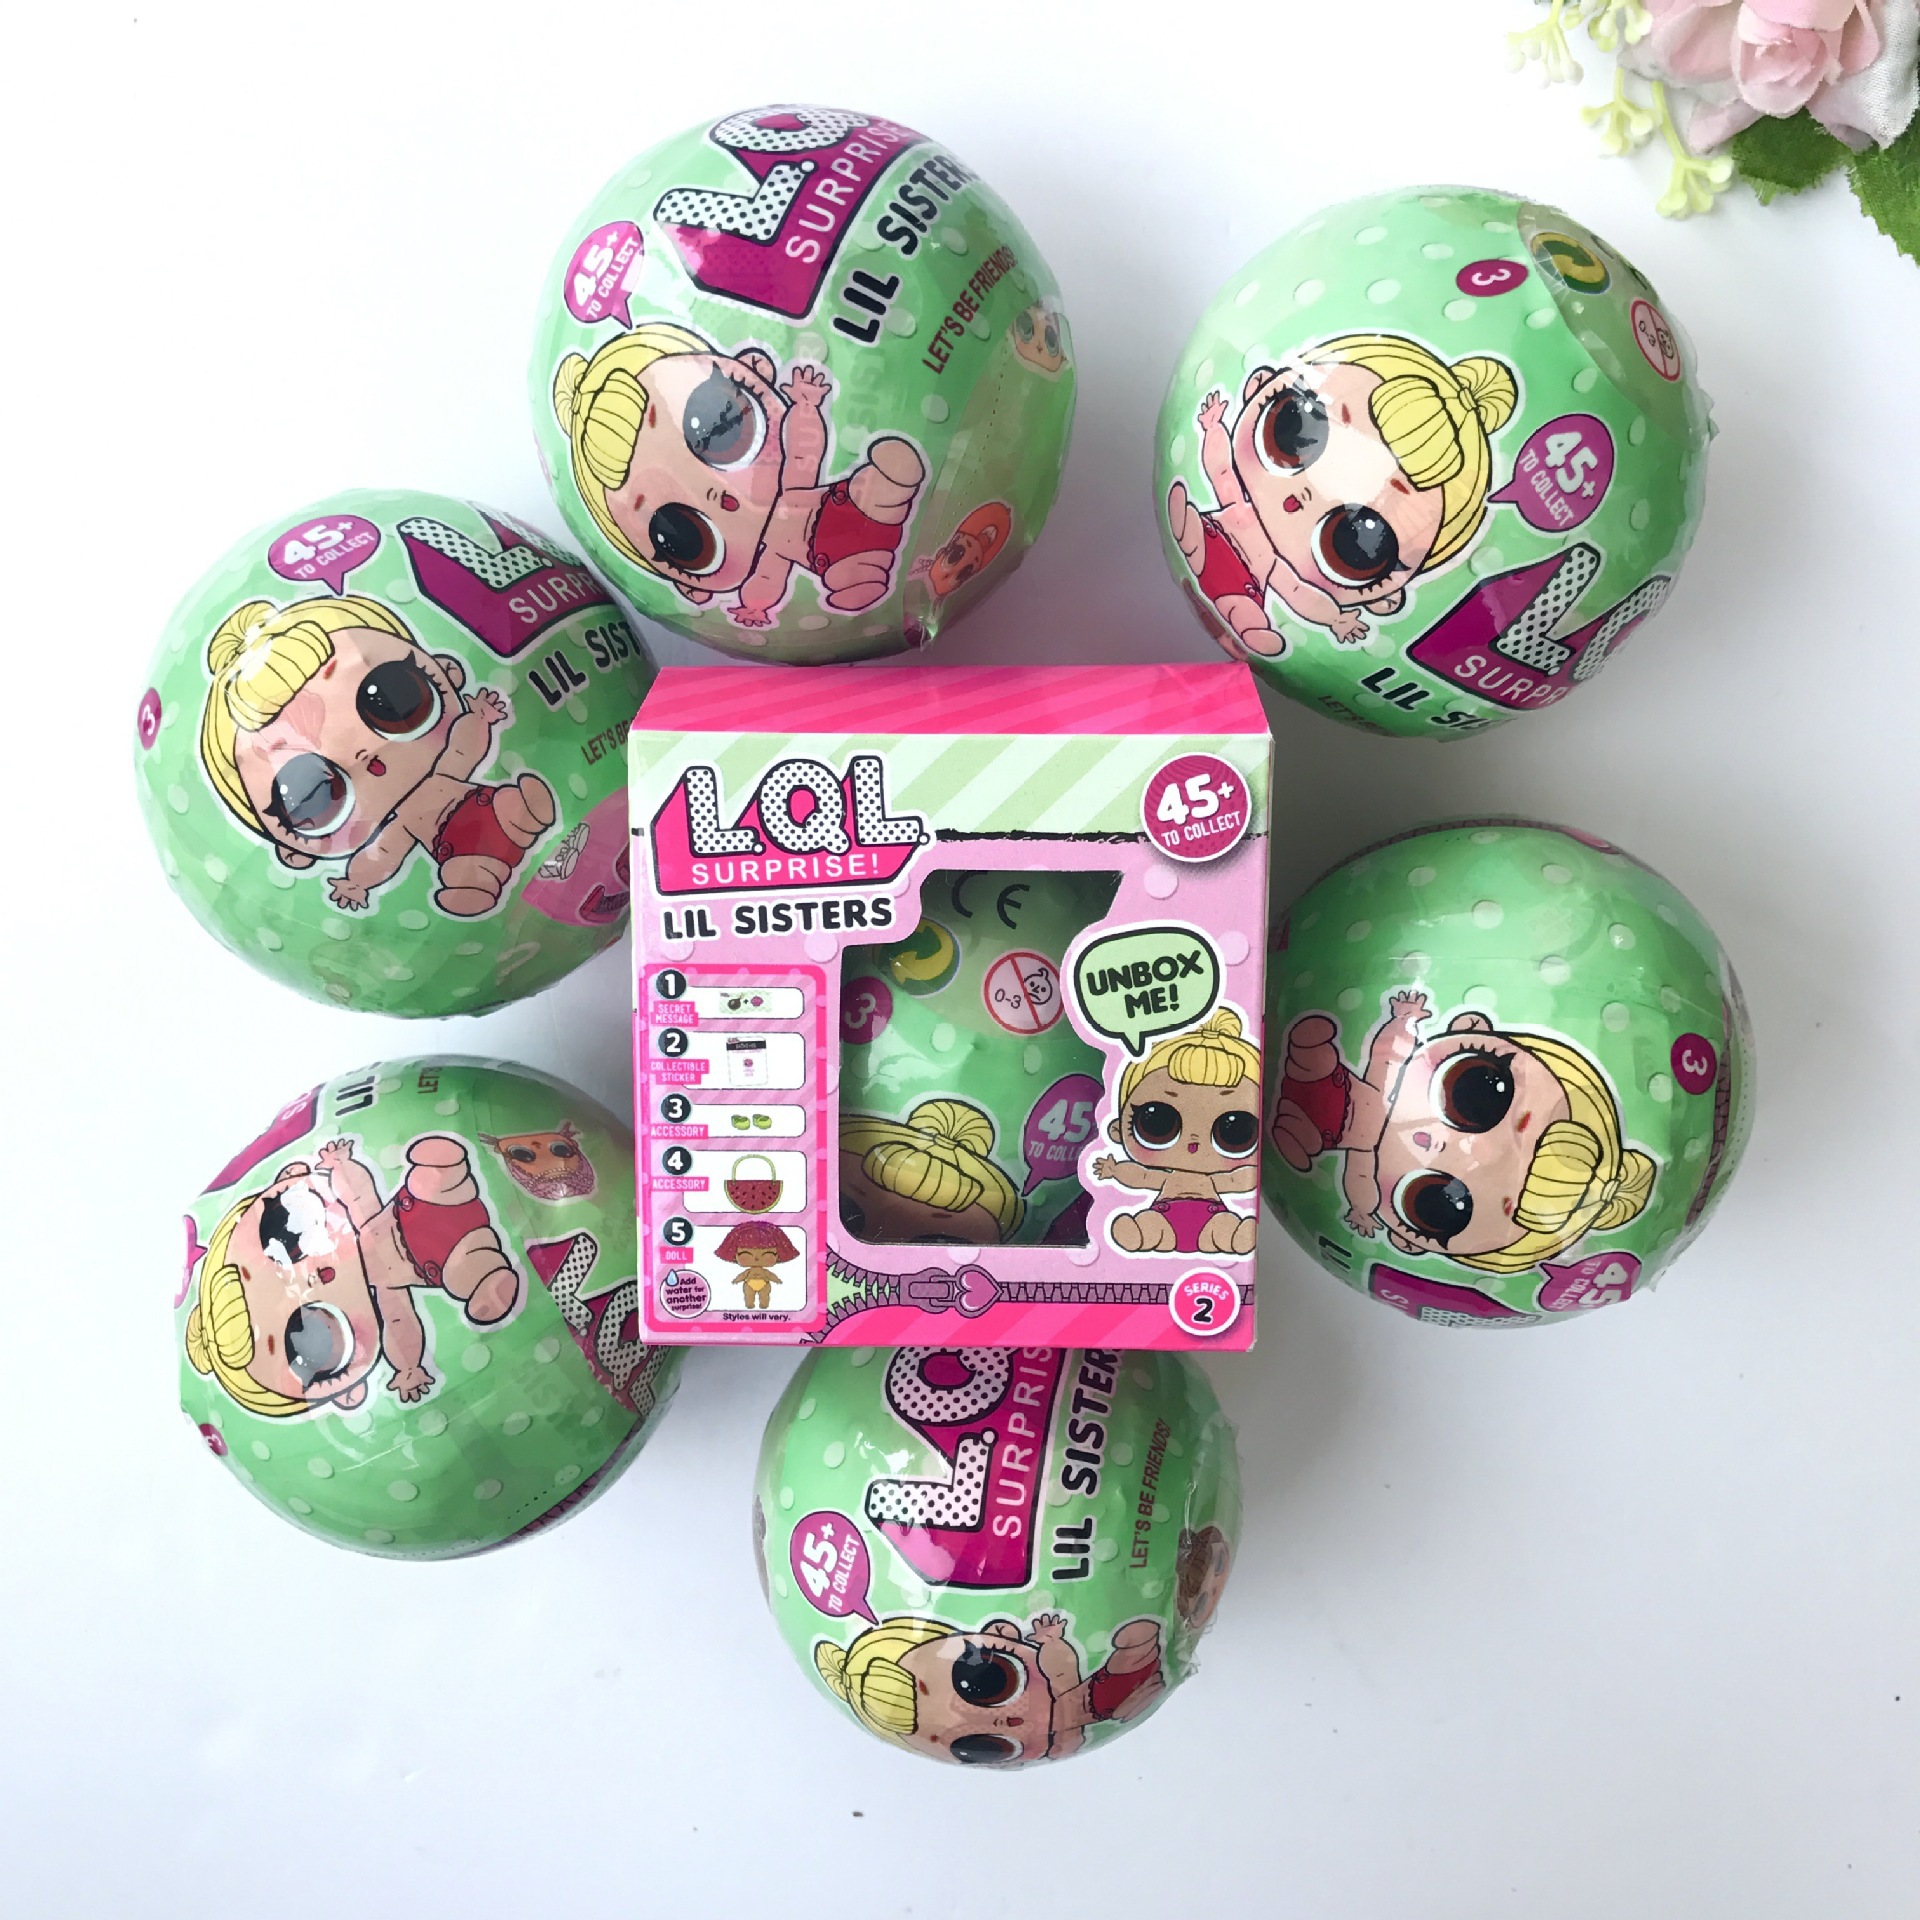 Generic LoL Lil Outrageous 7 Layers Surprise Ball Series 2 Doll Blind